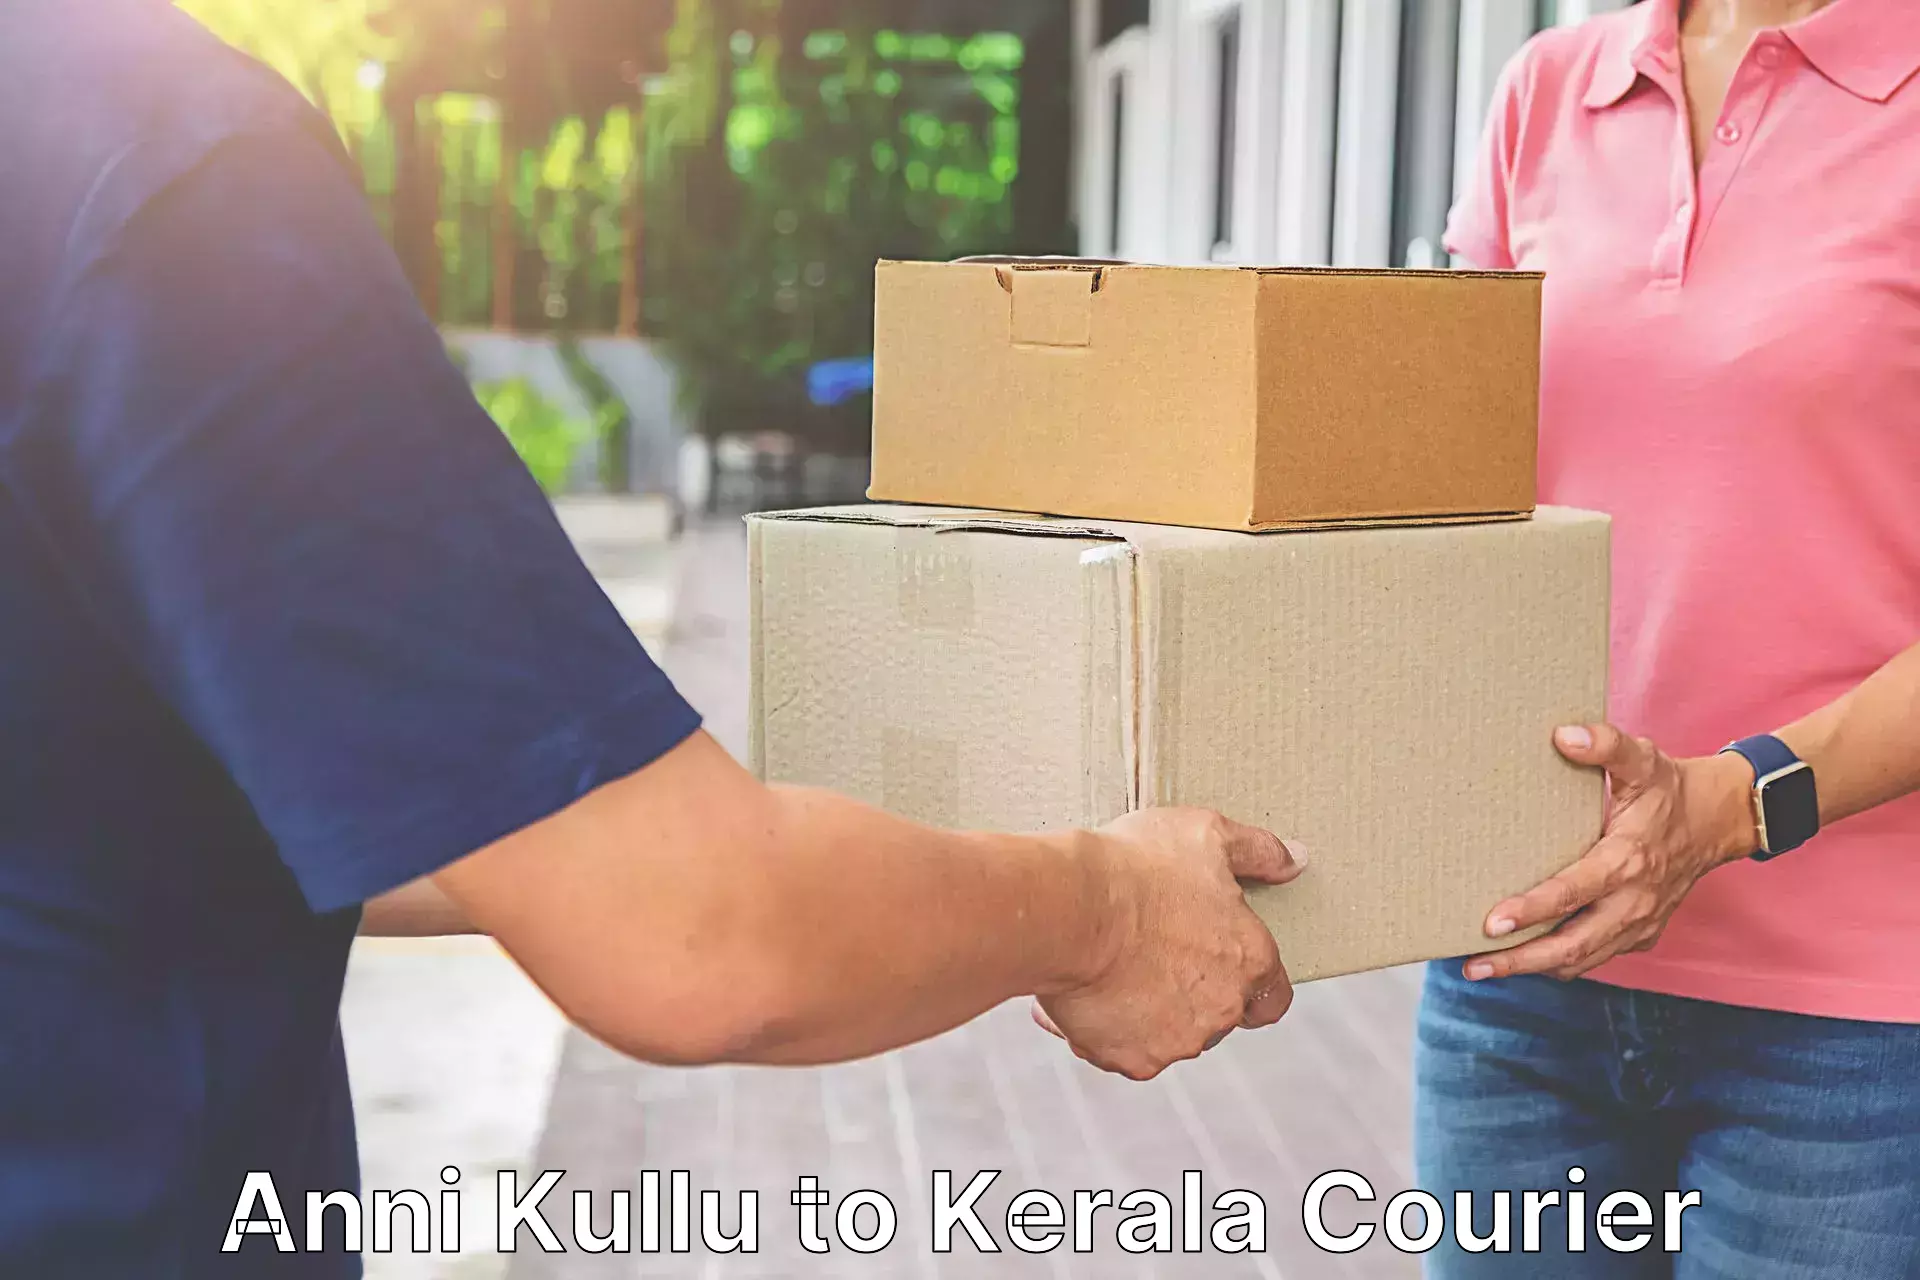 Speedy delivery service Anni Kullu to Cochin University of Science and Technology